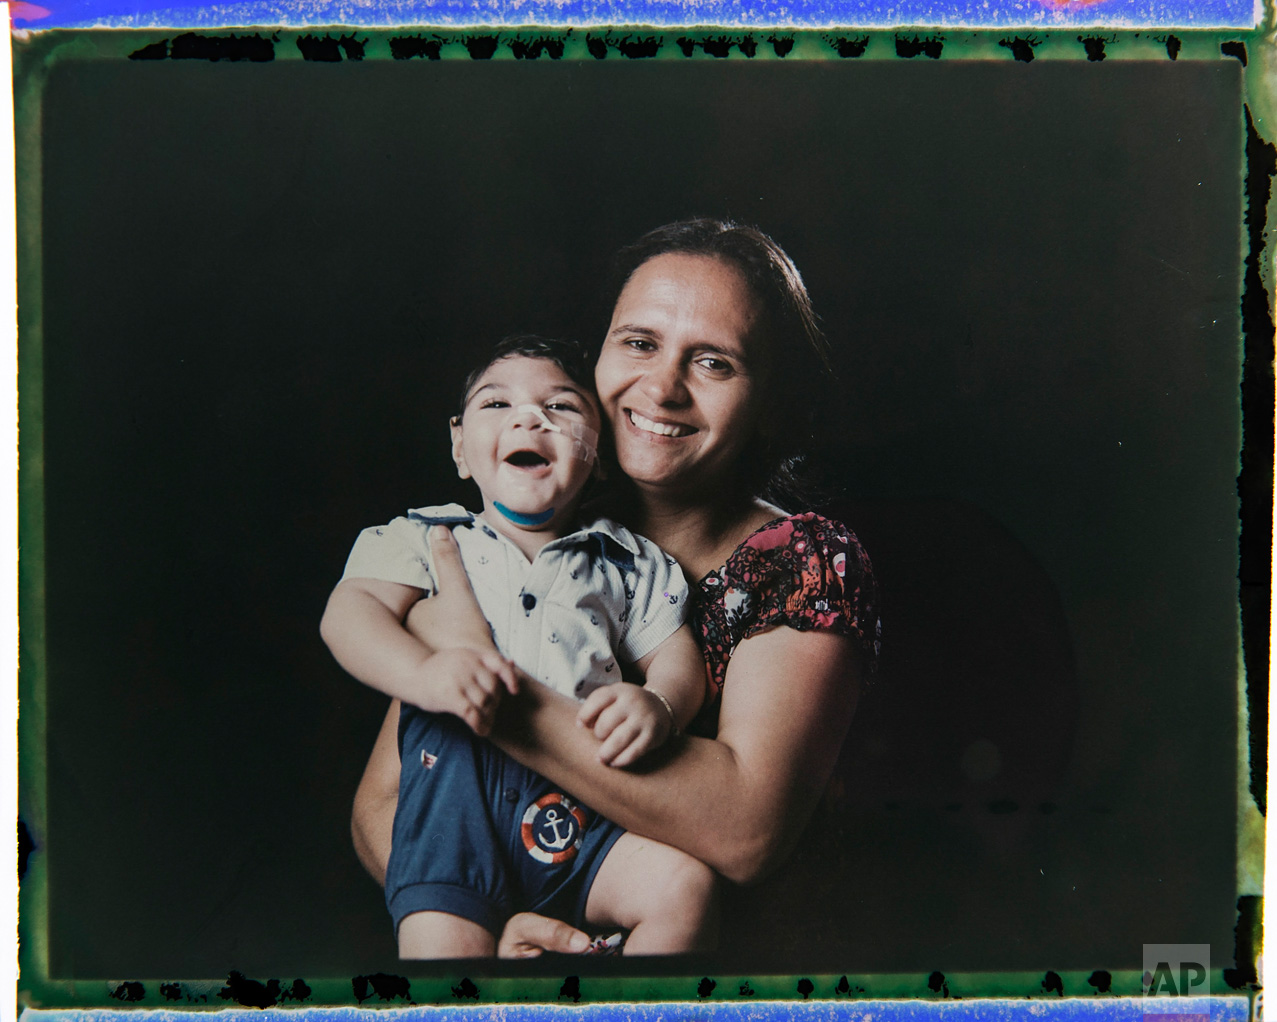  In this Sept. 29, 2016 photo made from a negative recovered from instant film, Rozilene Ferreira poses with her one-year-old son, Arthur Conceicao, who was born with microcephaly, one of many serious medical problems that can be caused by congenital